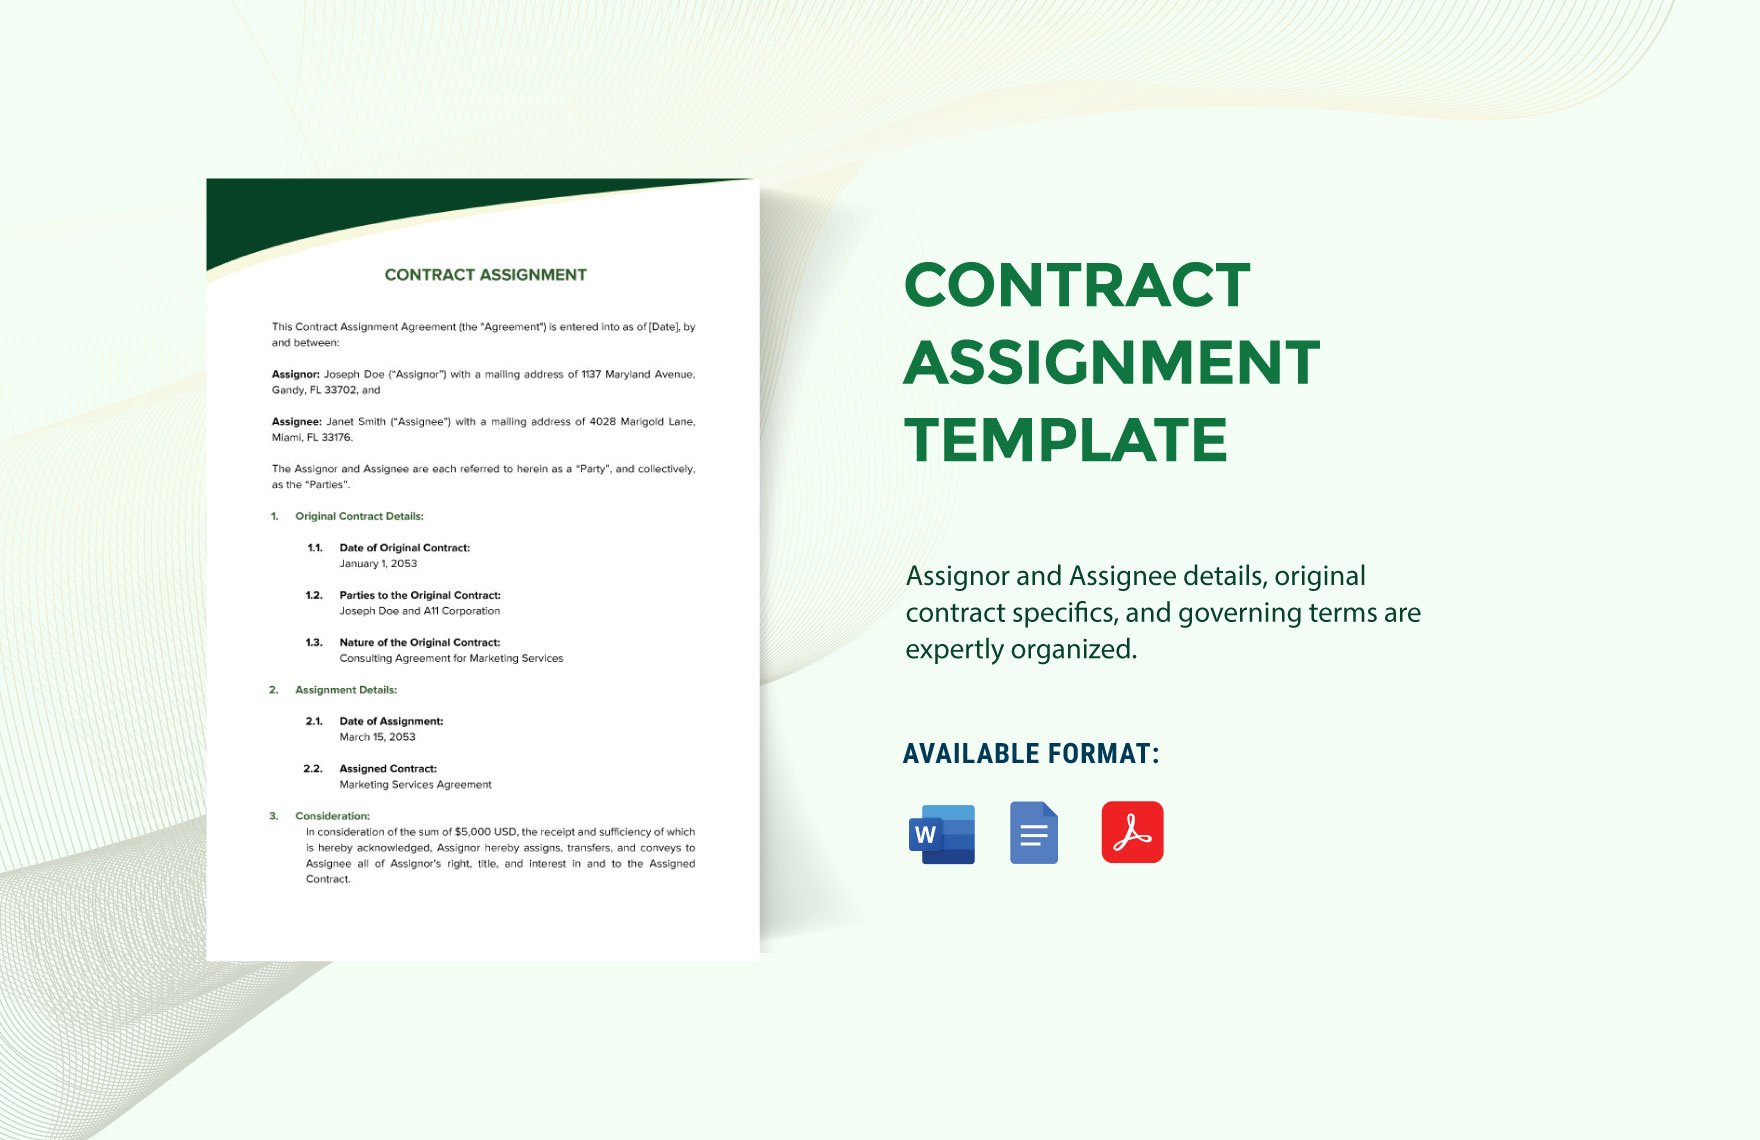 Contract Assignment Template